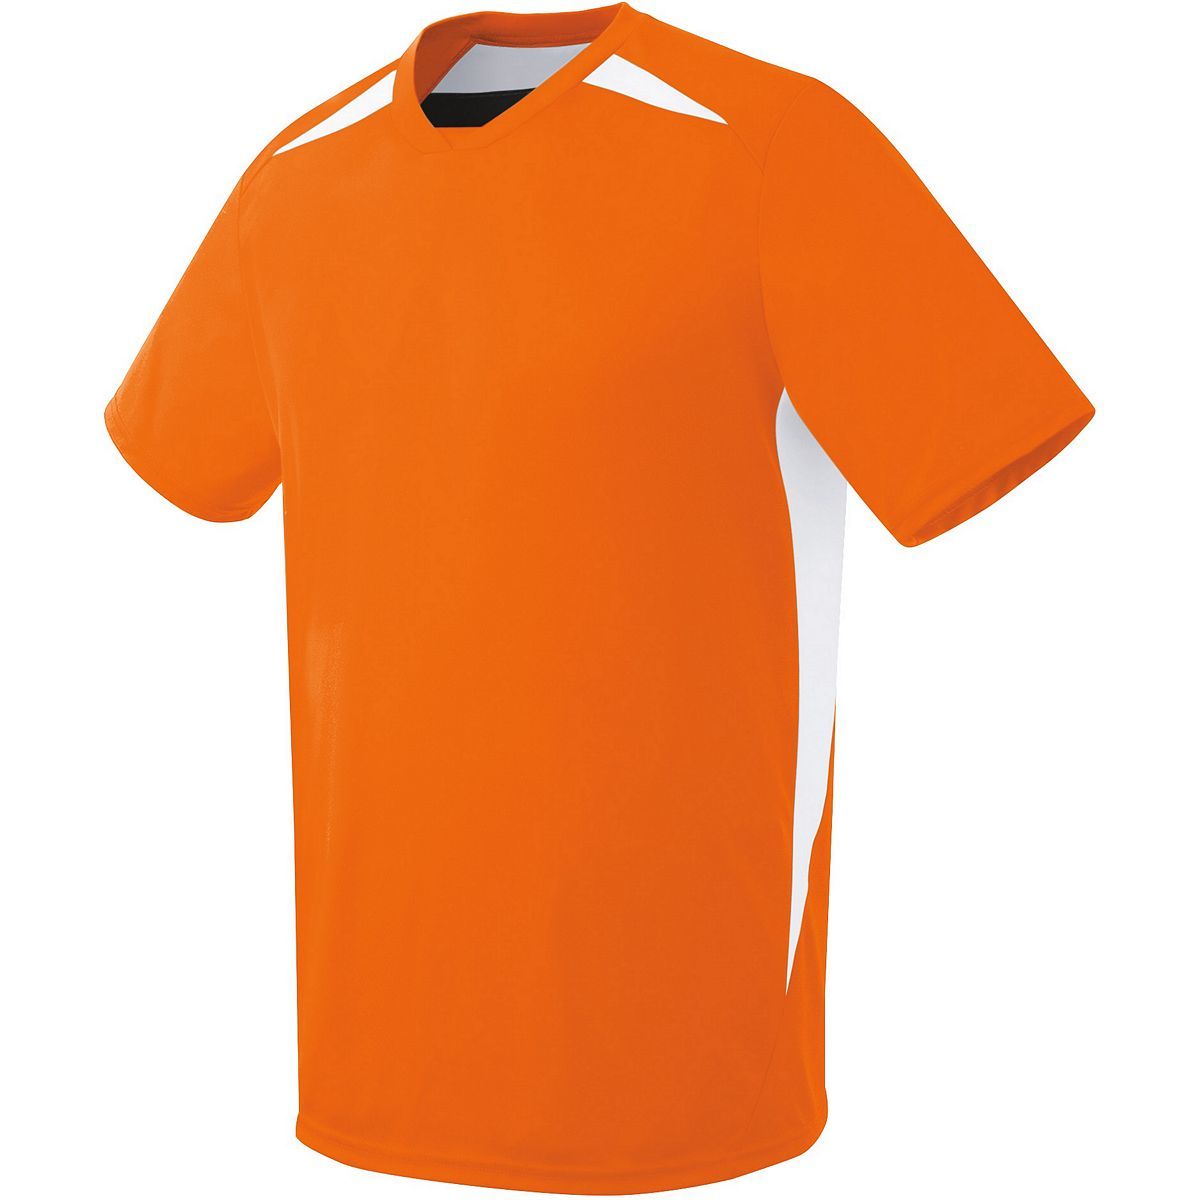 High 5 Adult Hawk Jersey in Orange/White  -Part of the Adult, Adult-Jersey, High5-Products, Soccer, Shirts, All-Sports-1 product lines at KanaleyCreations.com